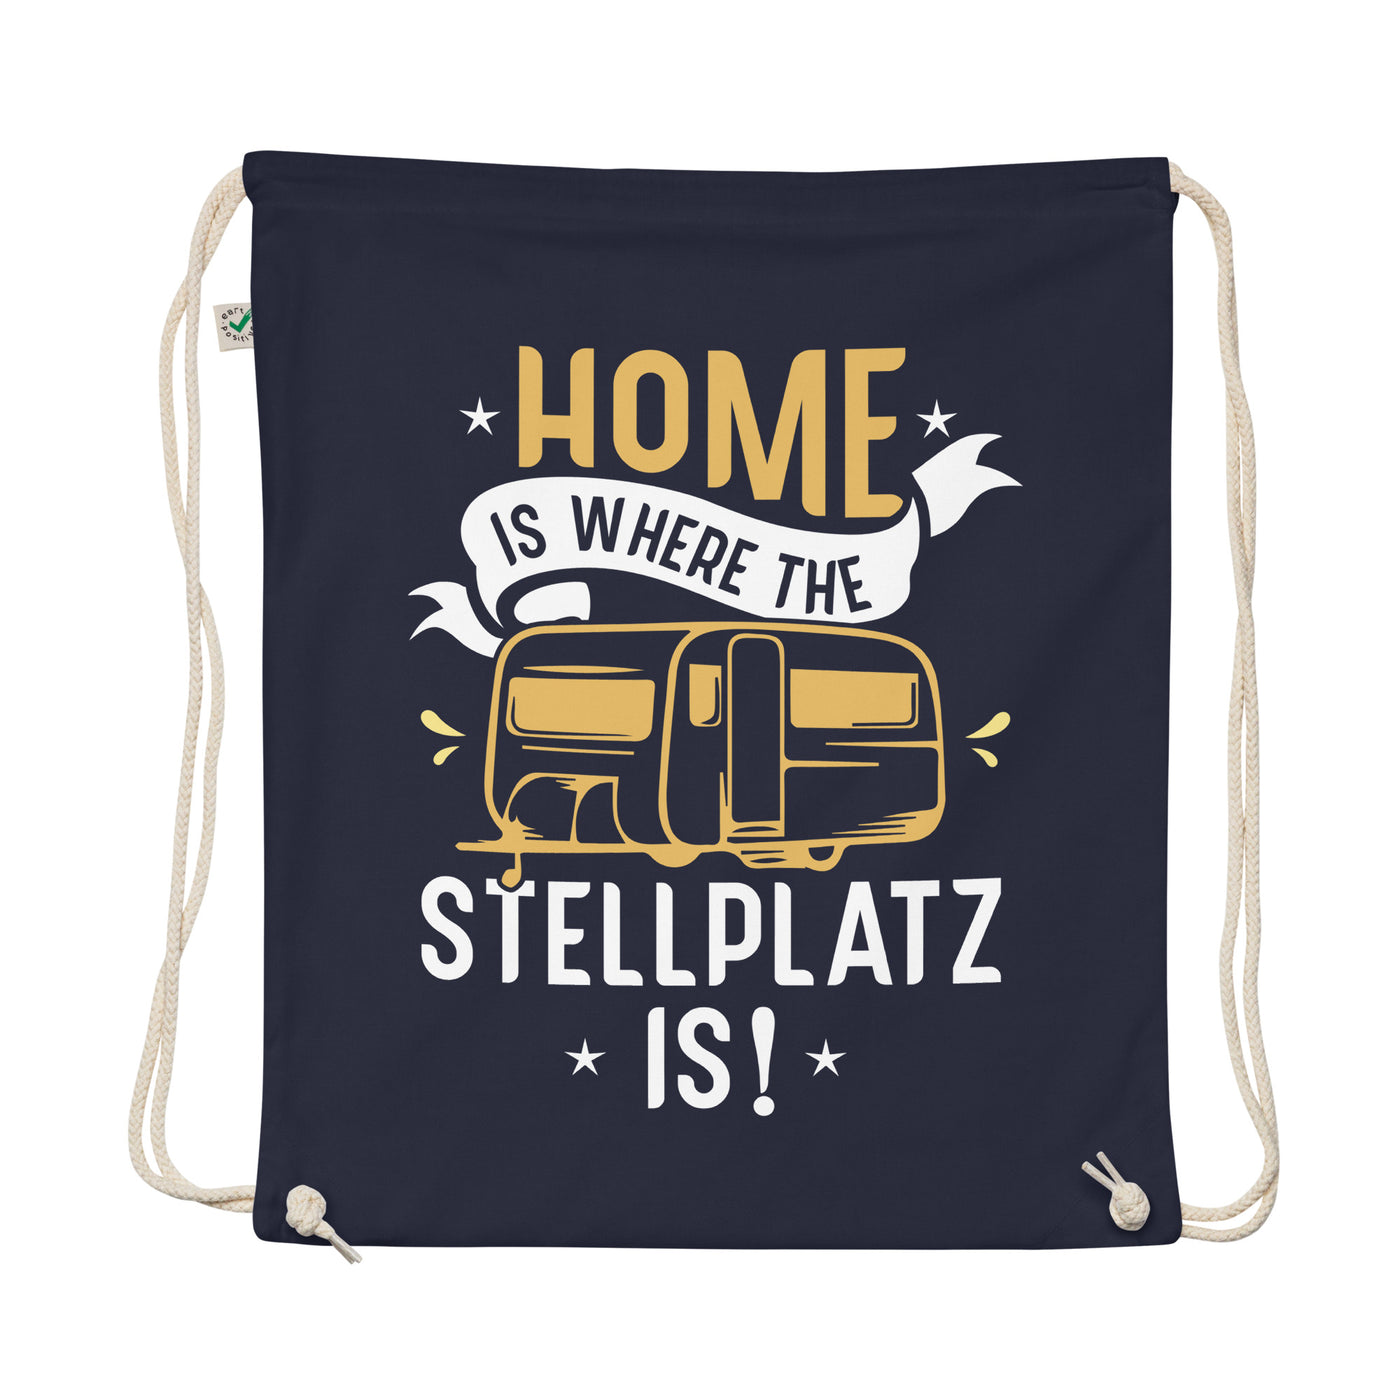 Home Is Where The Stellplatz Is - Organic Turnbeutel camping